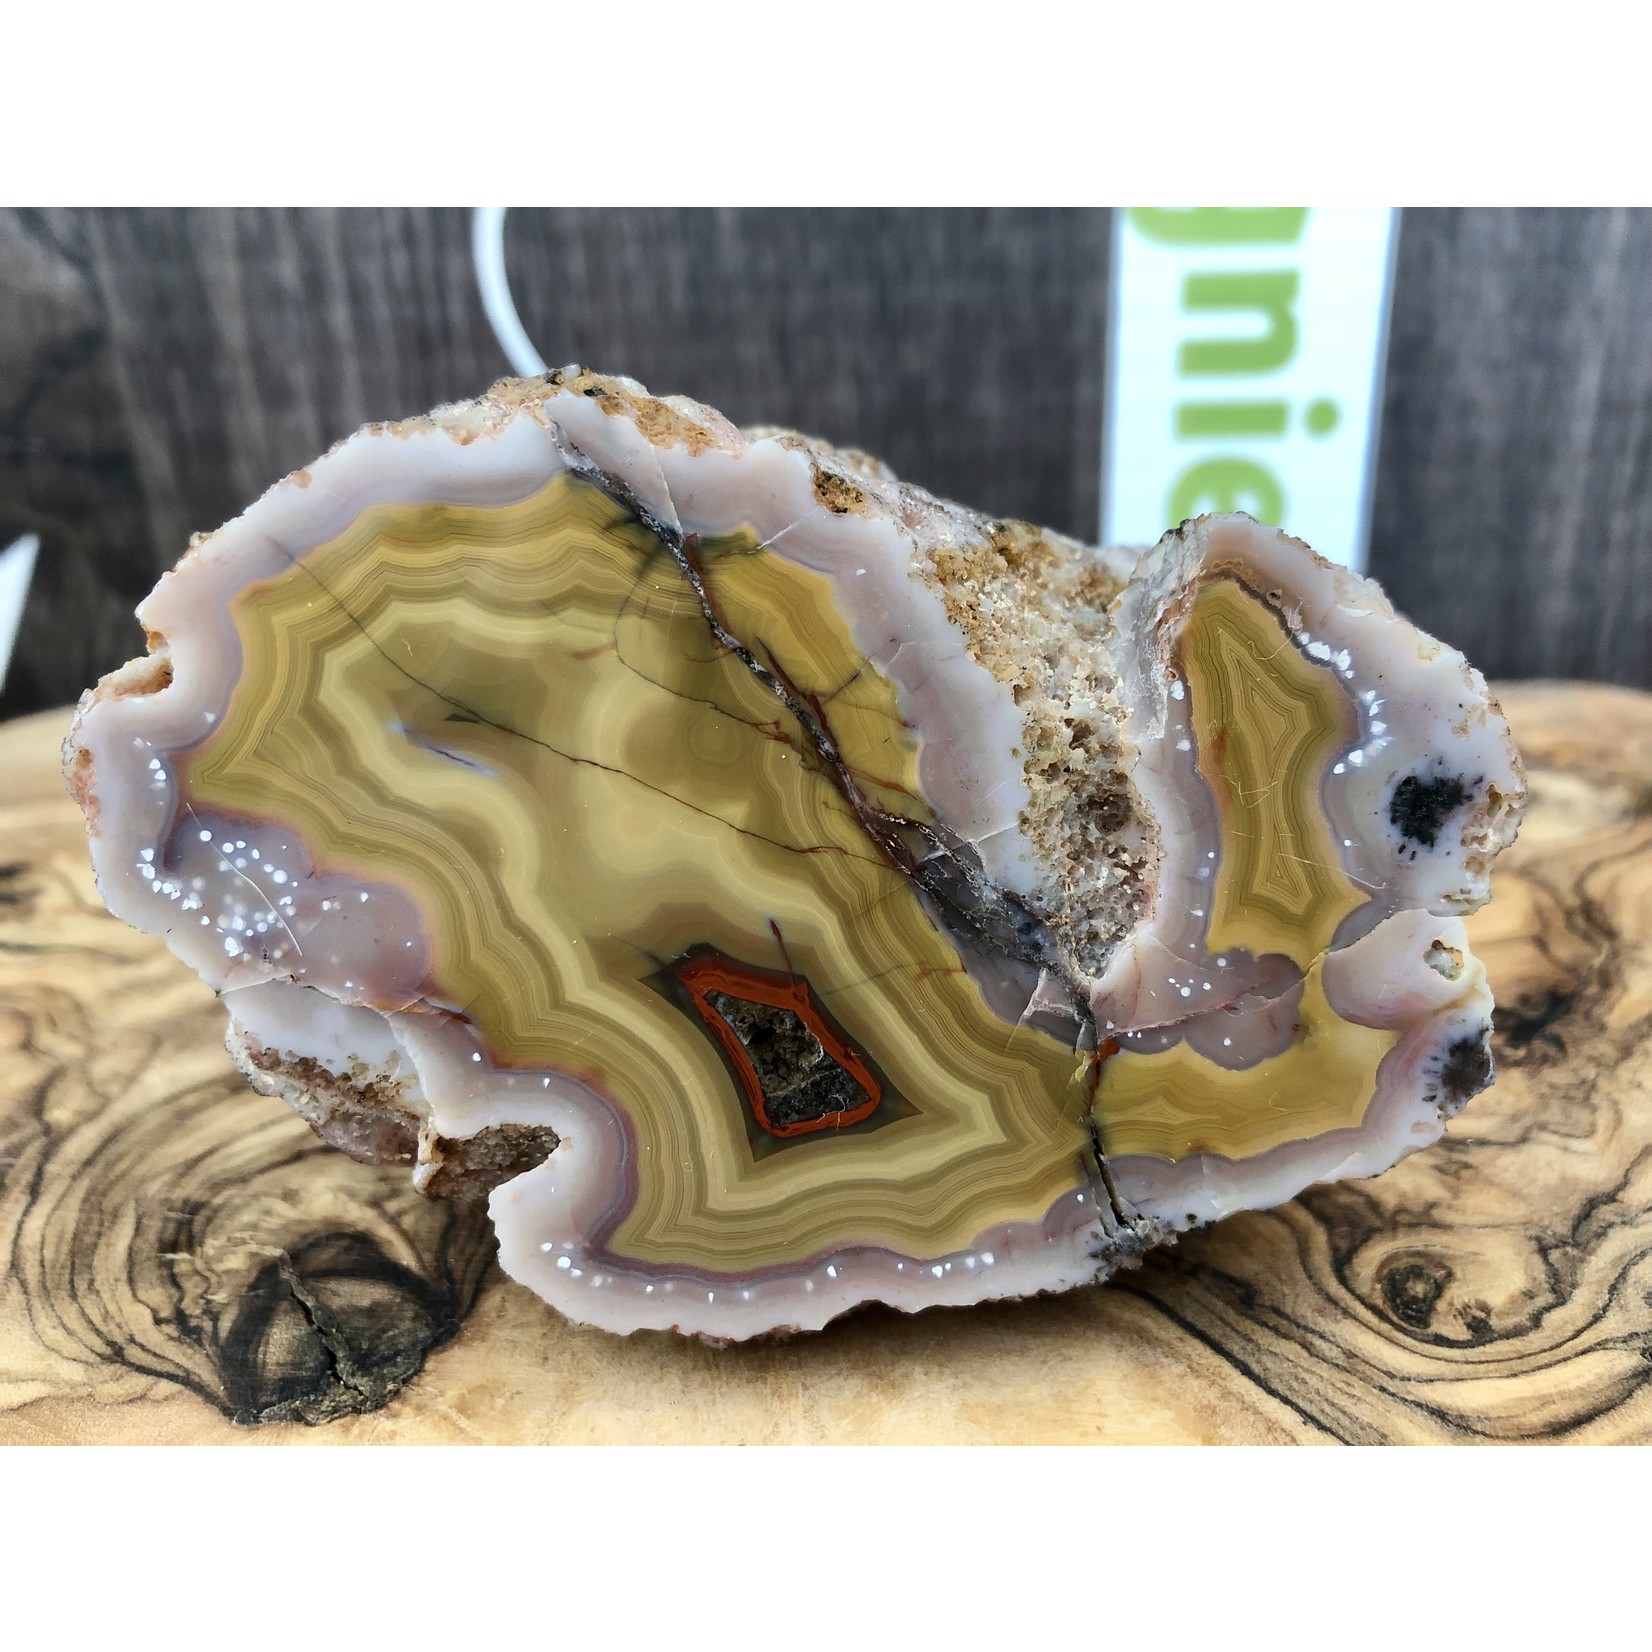 Mexican Agate Crazy Lace – Unique Arcoiris Natural Stone for Balance and Harmony